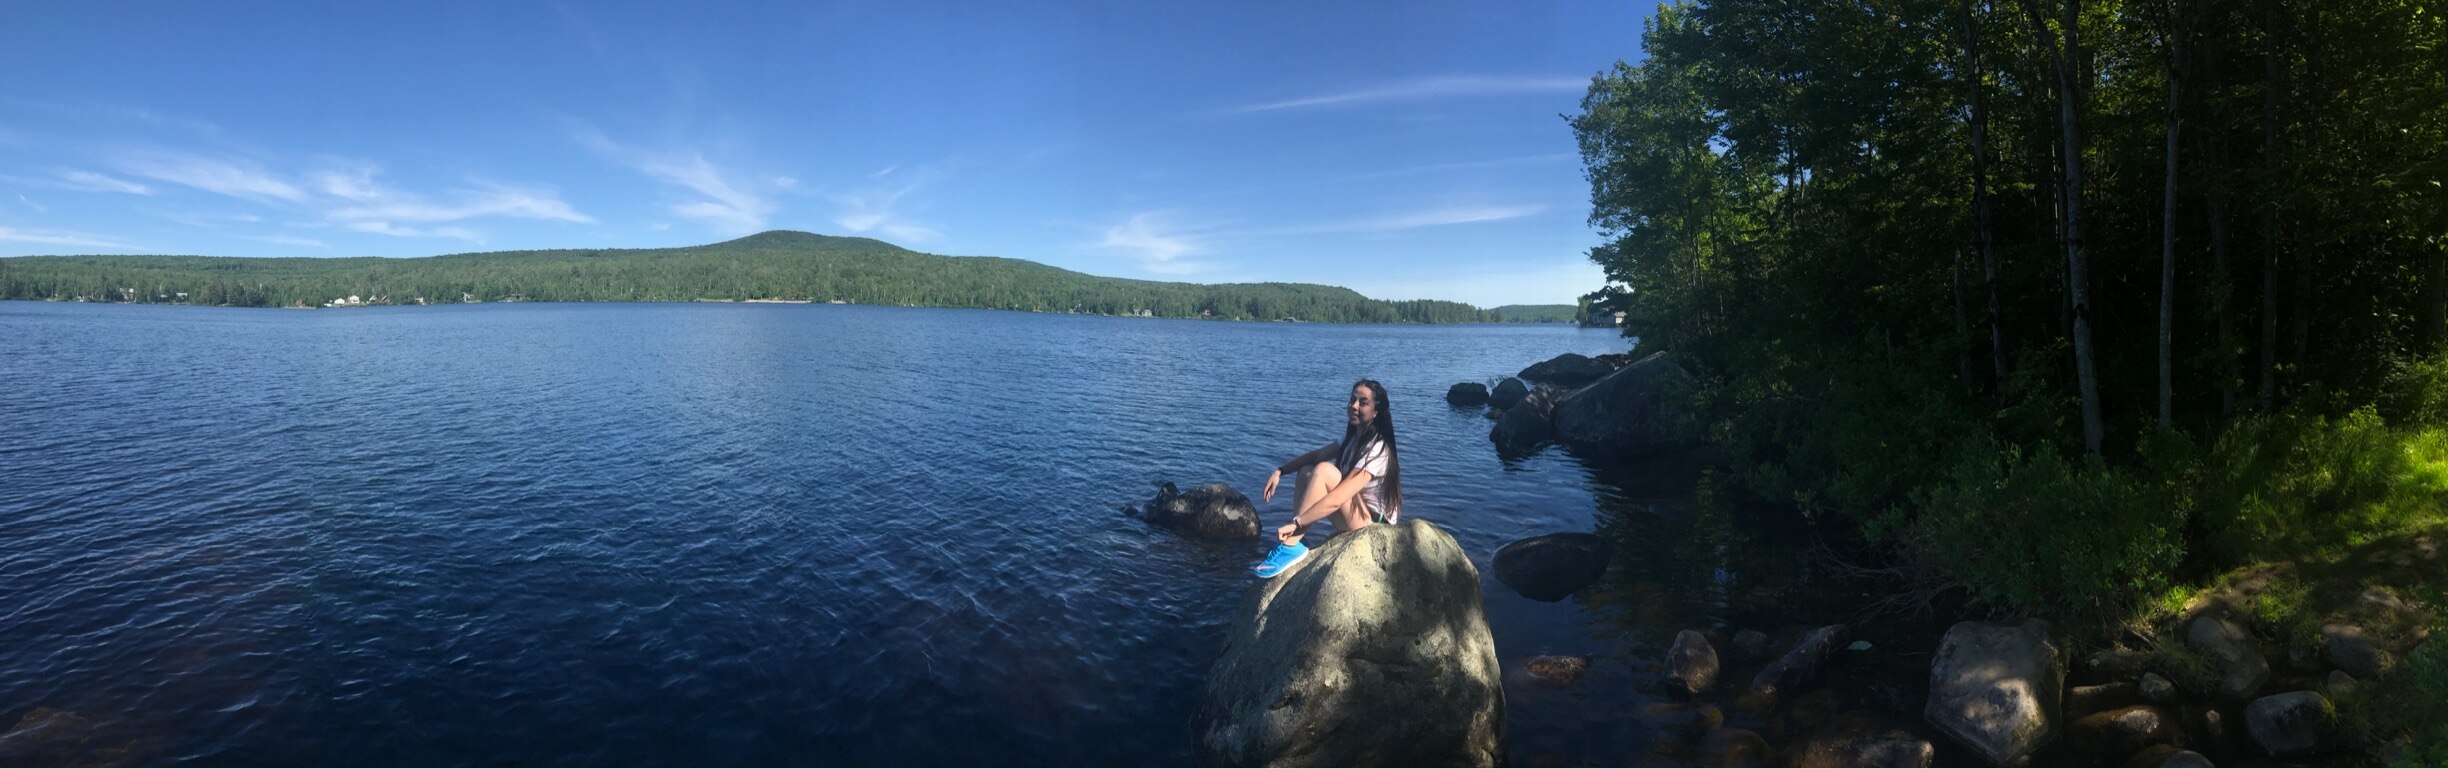 🏕•n a t u r e•
#campingdays #stateparkvermont #lakegroton #grotonstateforest #campsite #discoveryplace #sunnyday #perfectlyclear #nofilter #wanderlust #naturelovers #myview #exploration 
